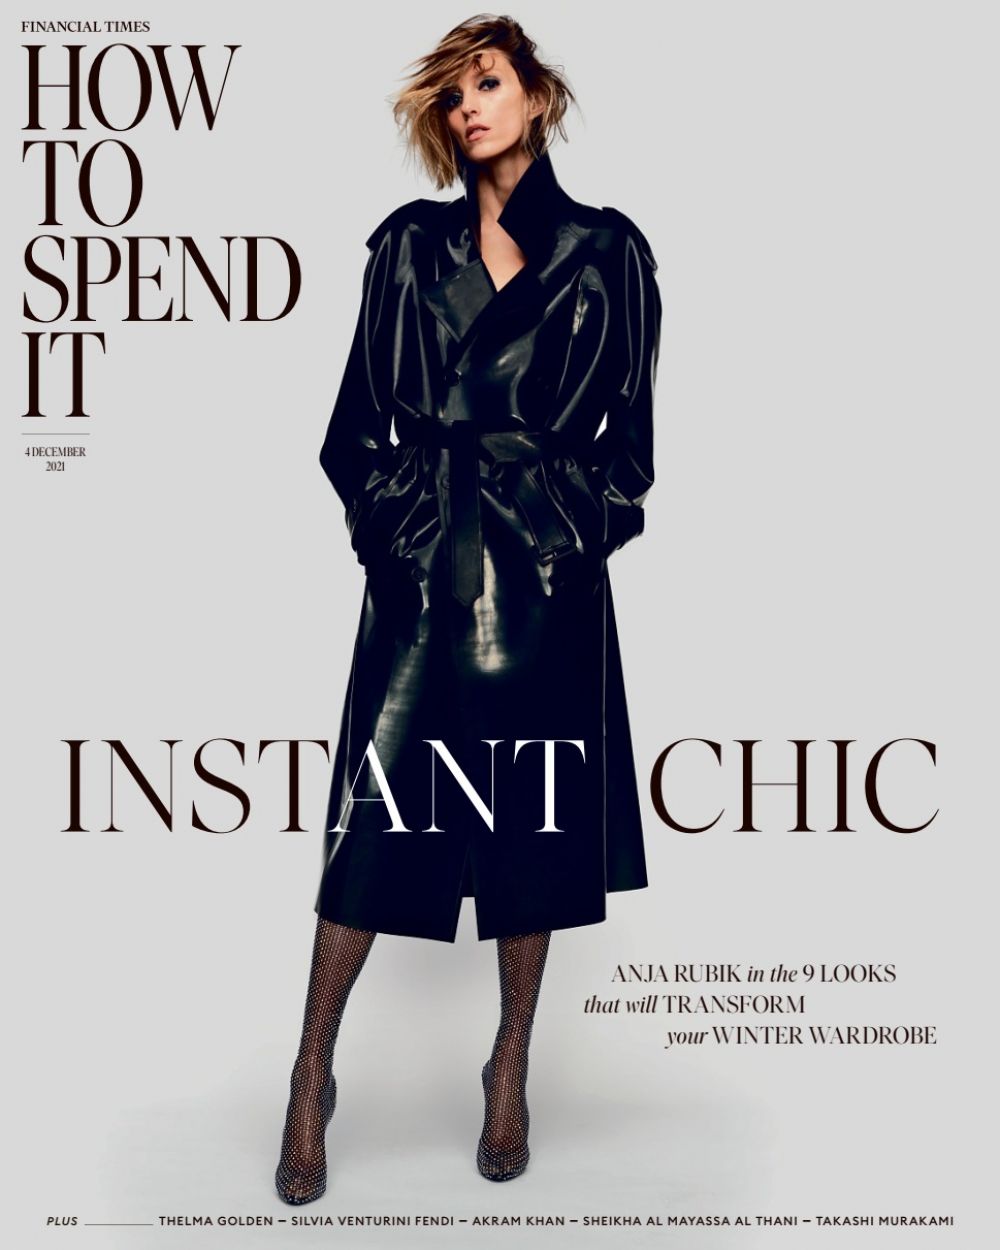 Anja Rubik For Financial Times How Spend It December